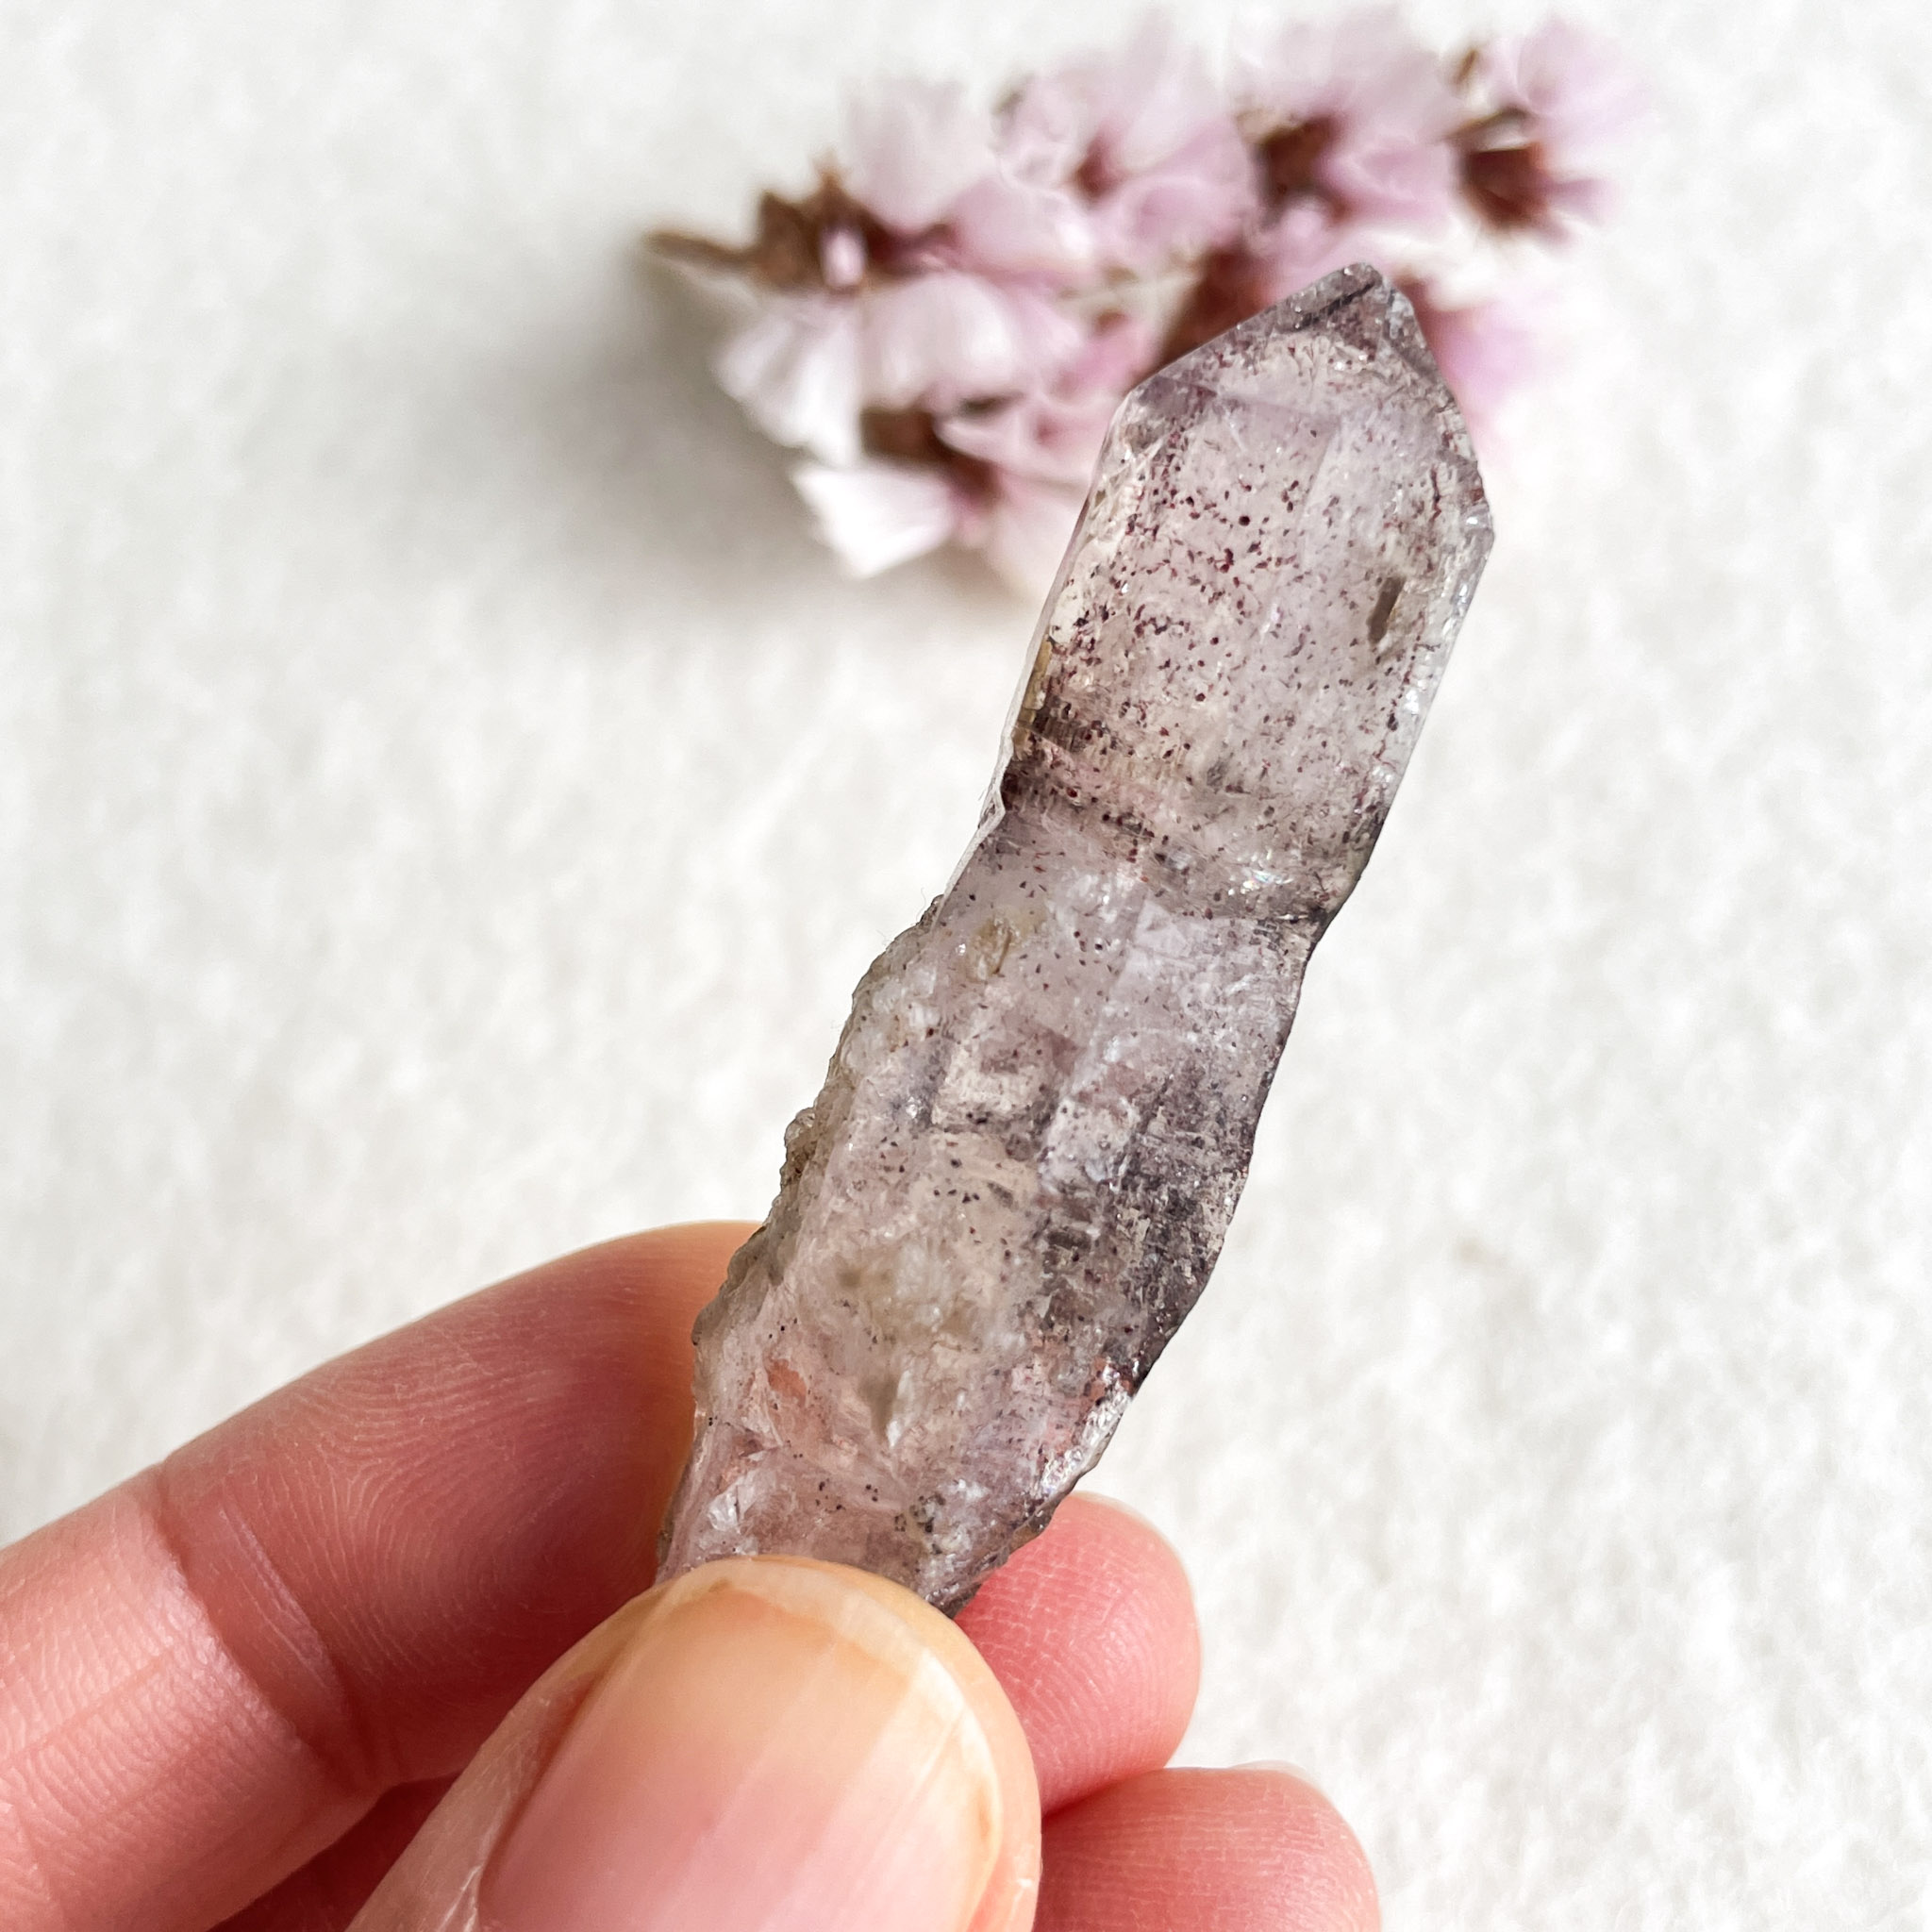 A close-up photo of a hand holding a quartz crystal, with a blurred blossom in the background.